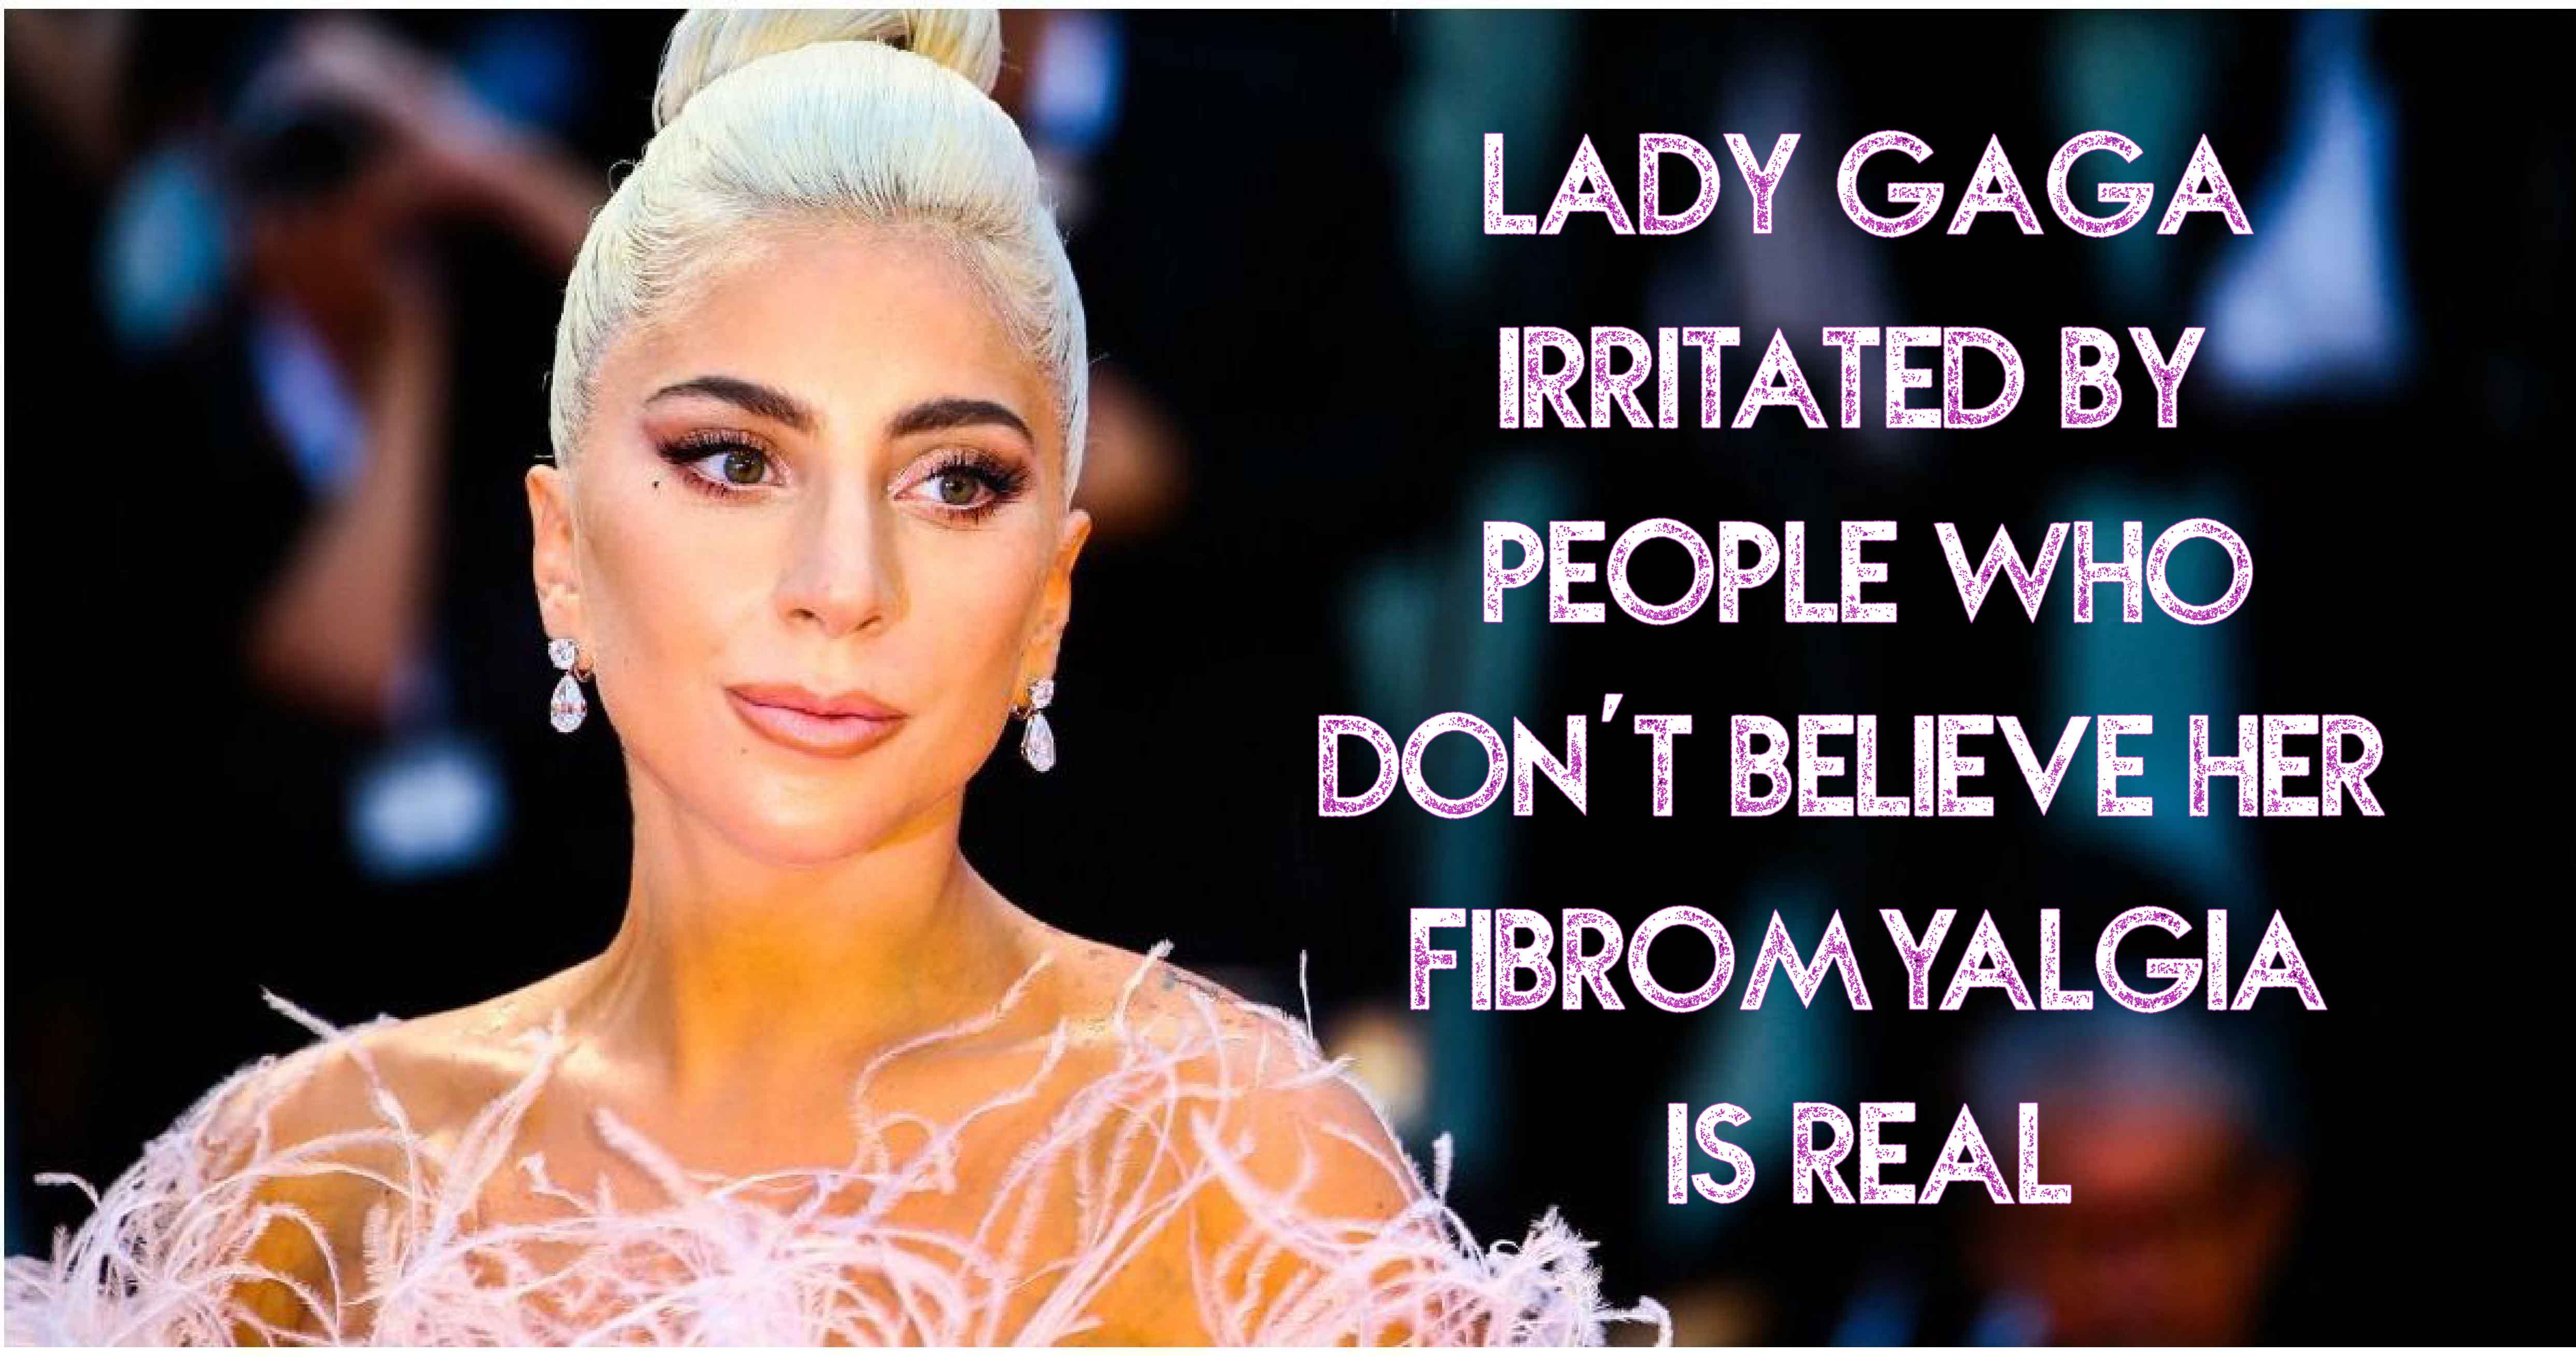 Lady Gaga Pissed by People who don’t Believe her Chronic Illness is Real